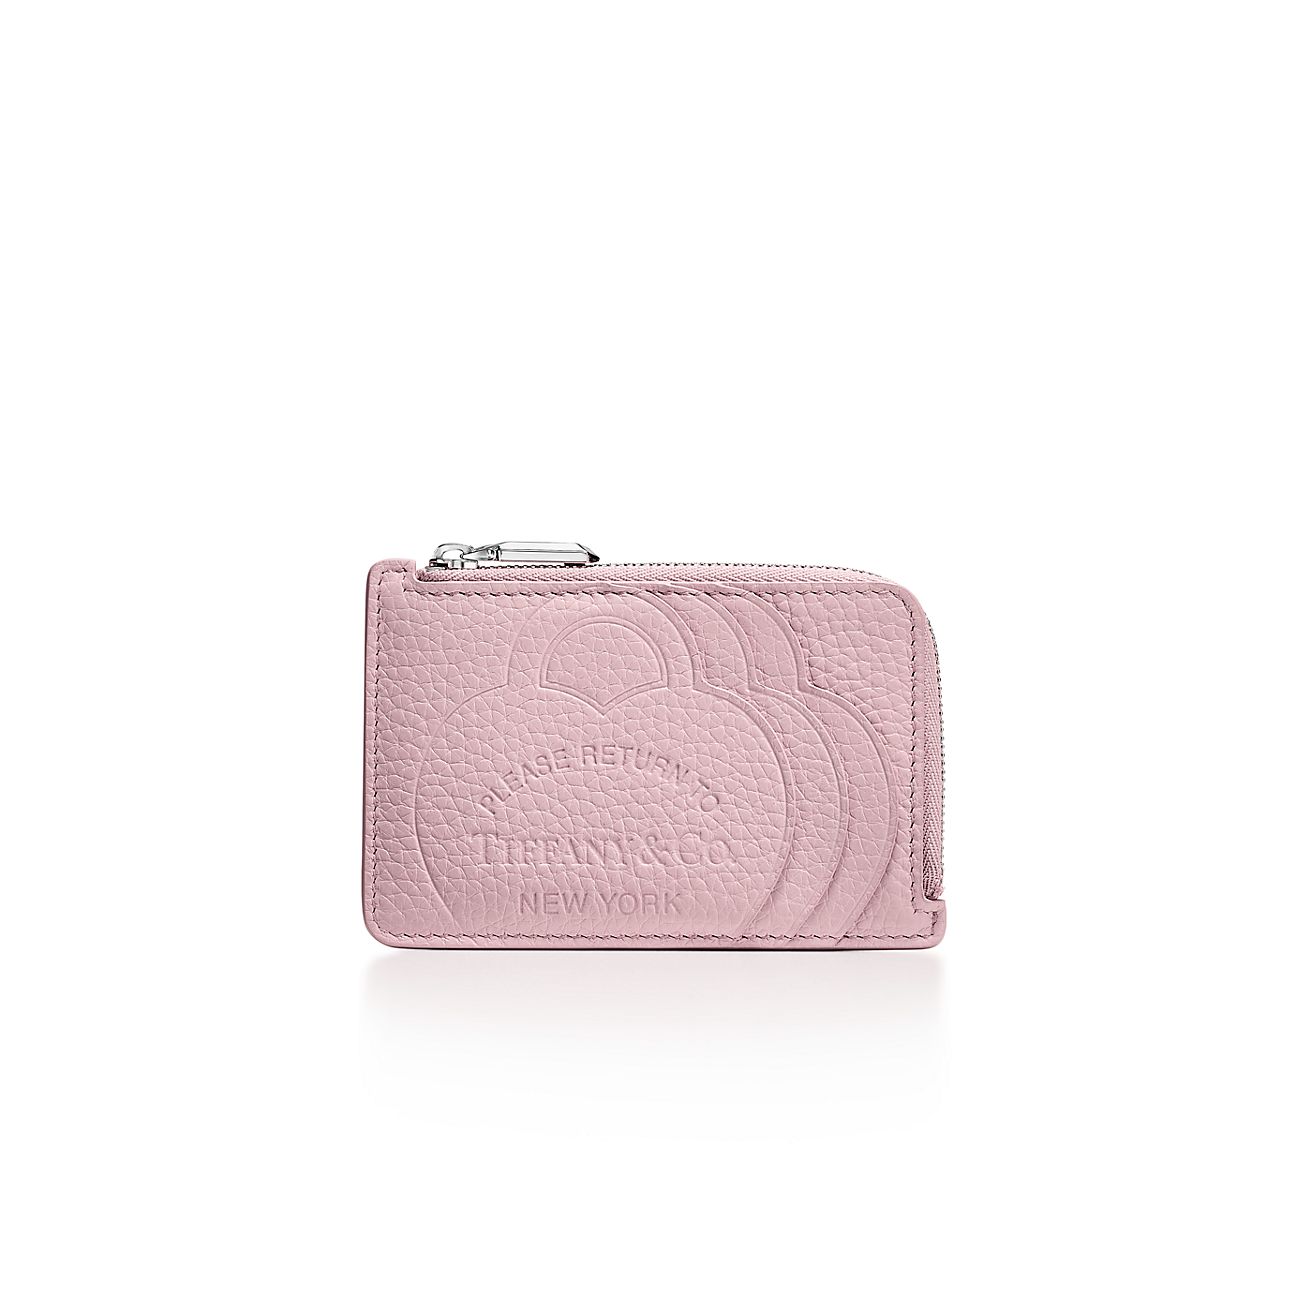 Return to Tiffany Zip Card Case in Crystal Pink Leather